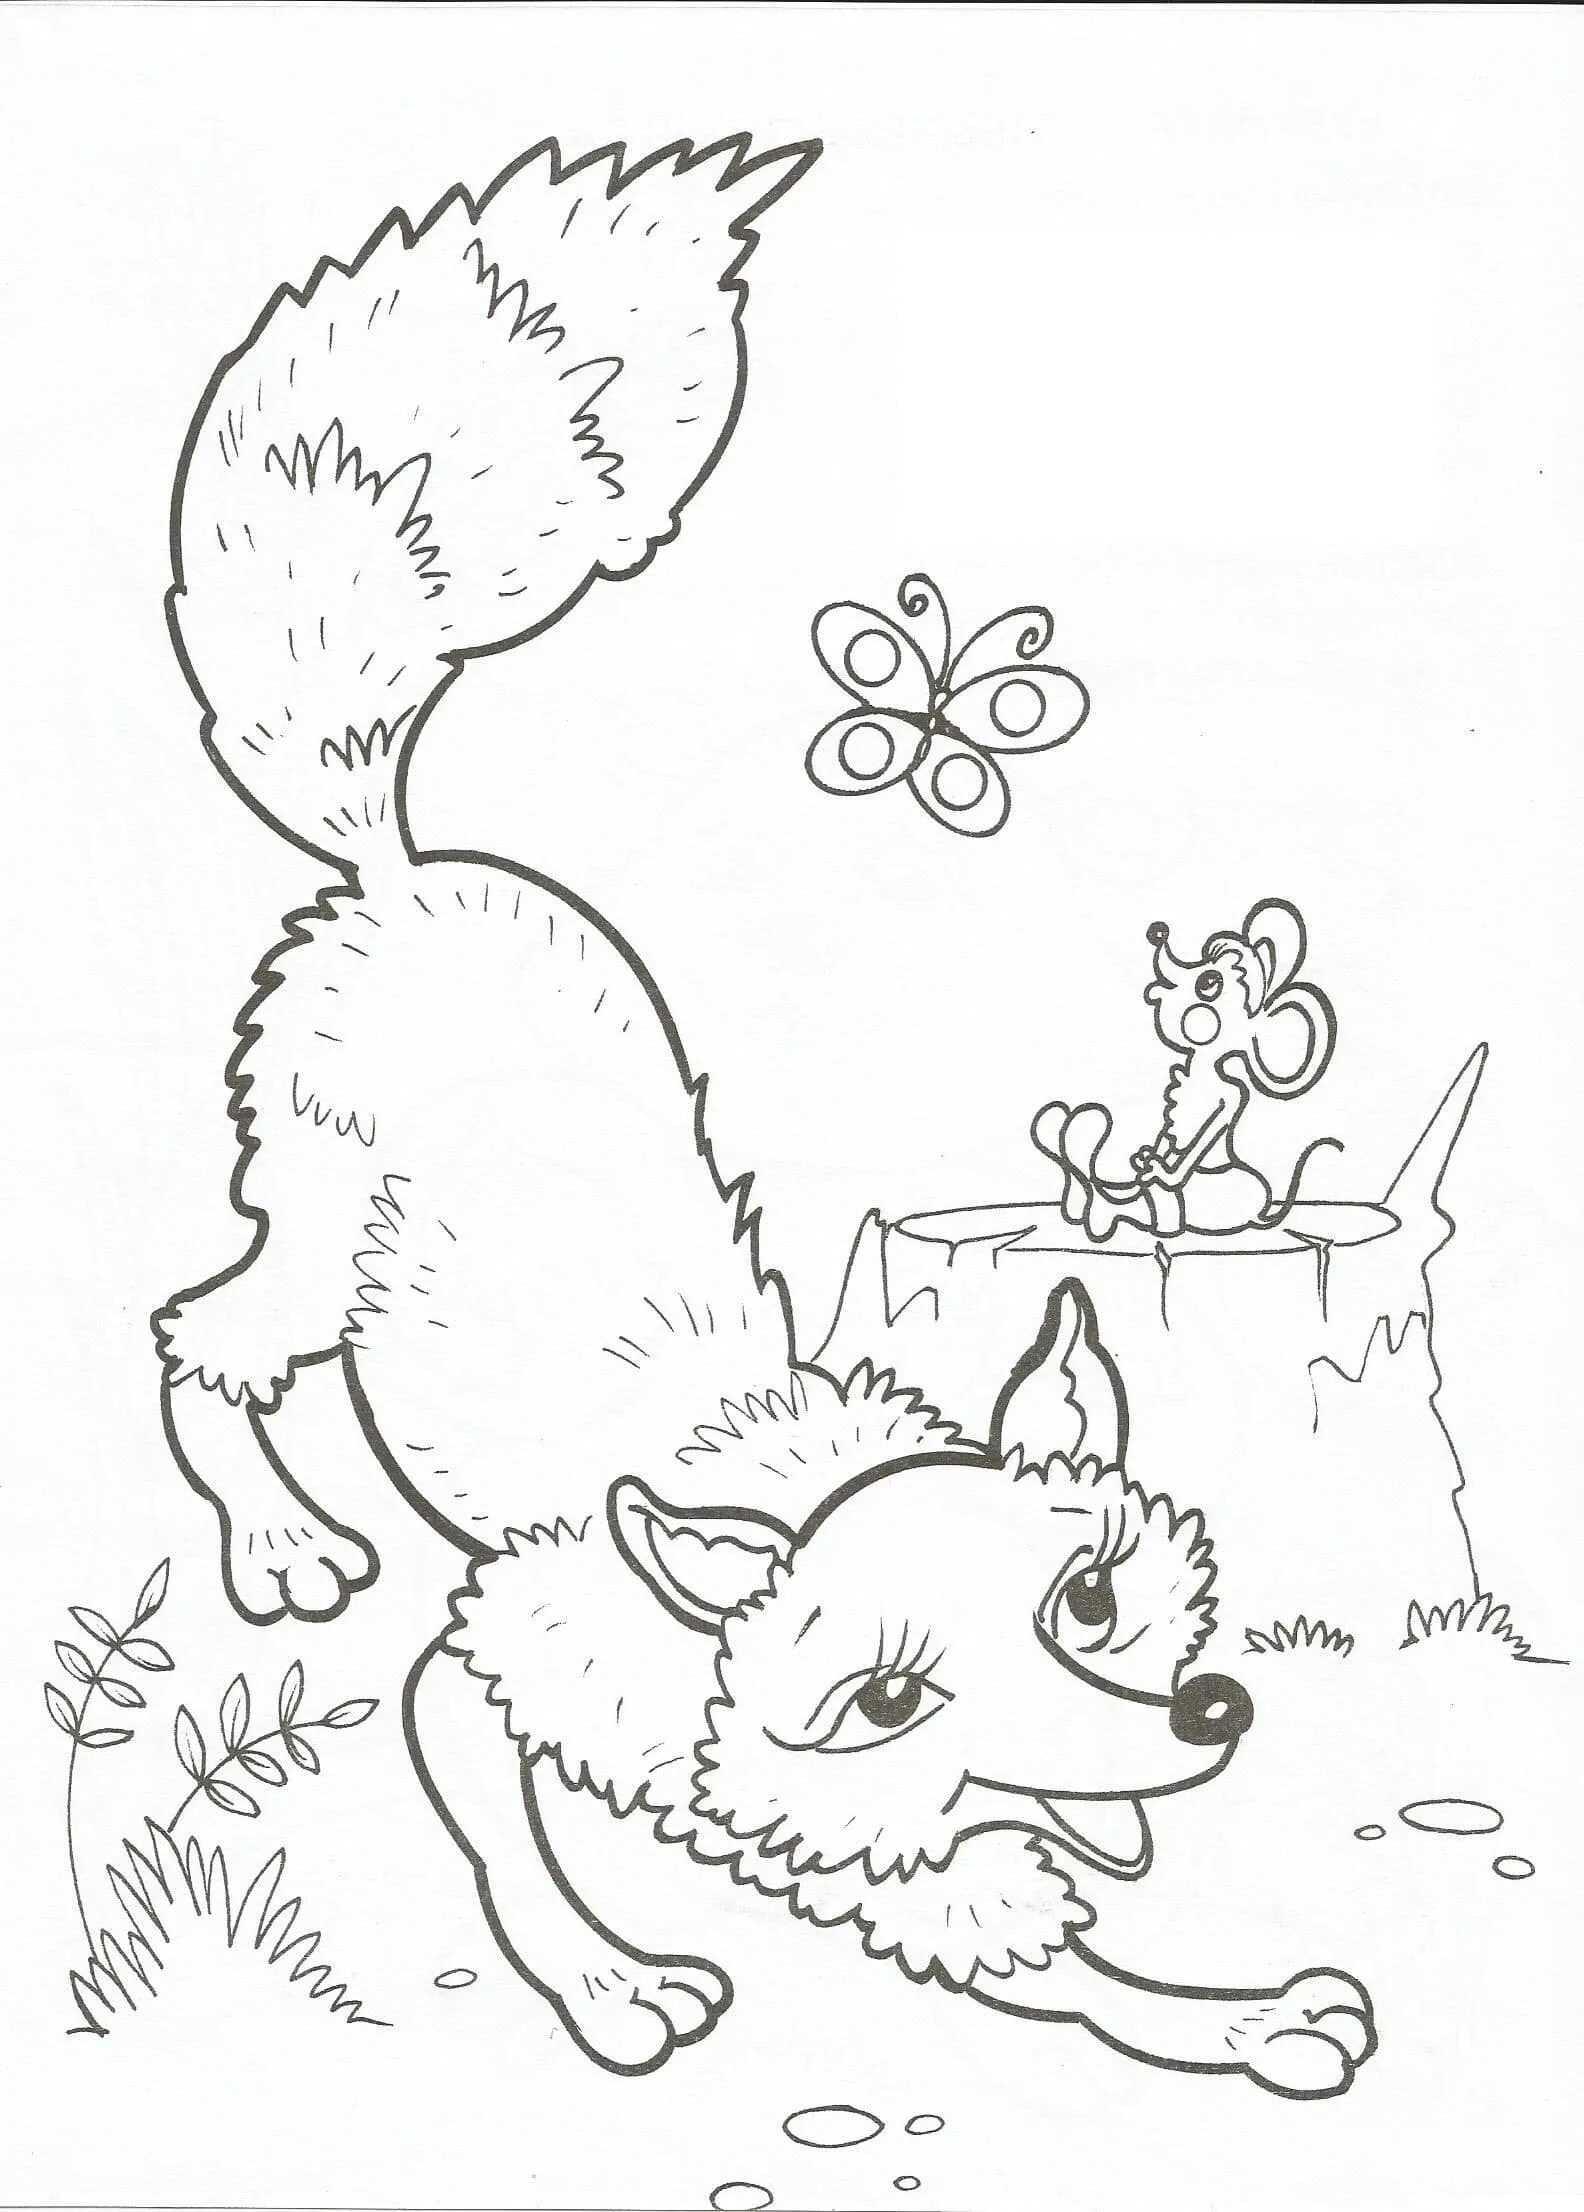 Coloring book sparkling fox and bianca mouse